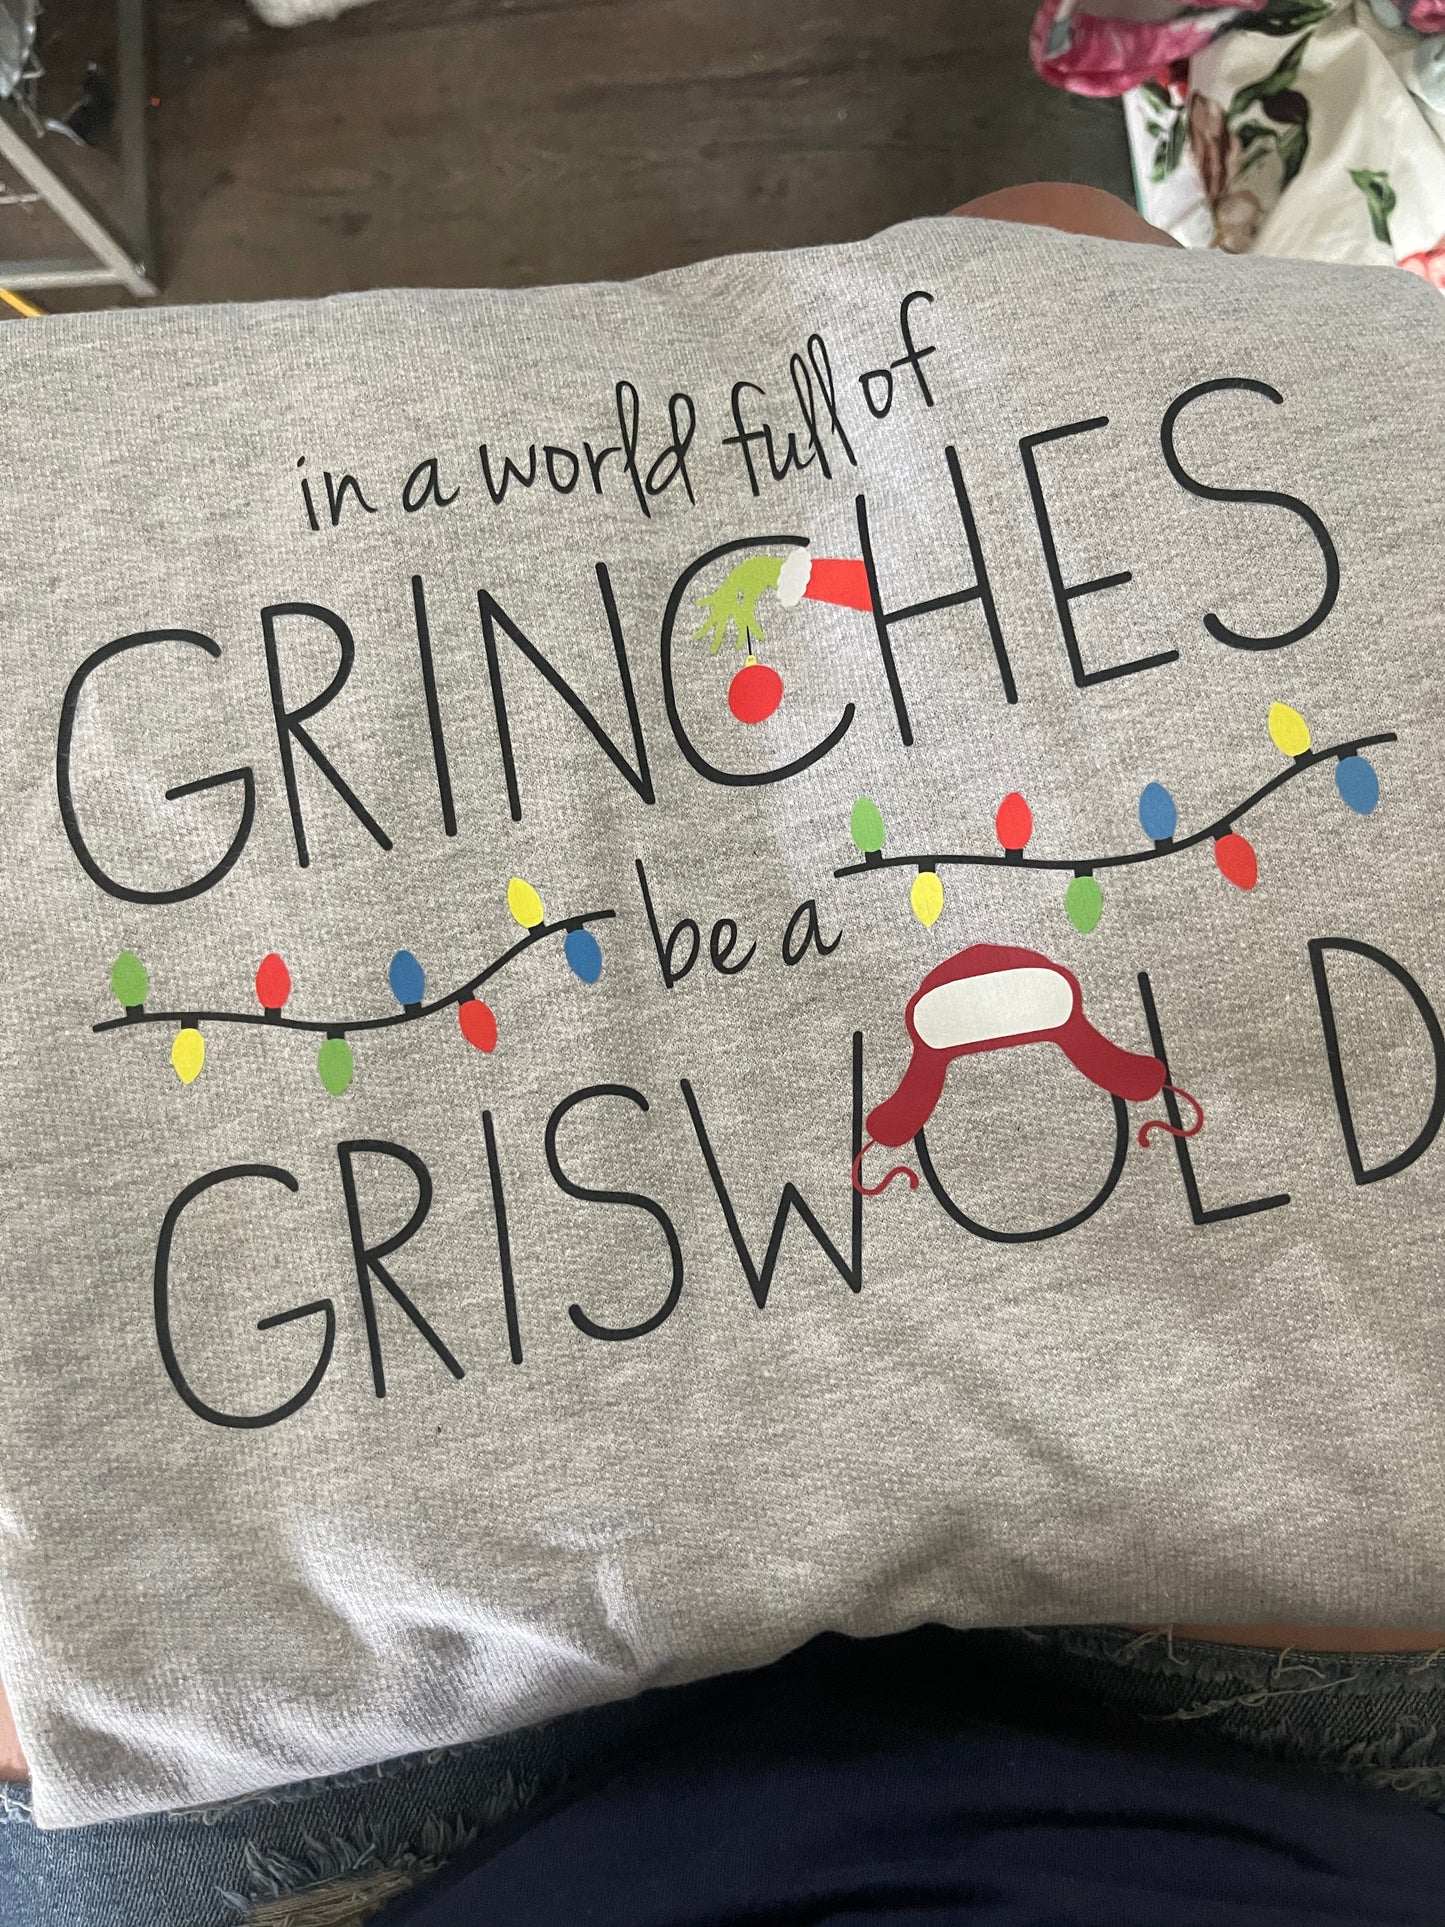 In a world of grinches be a griswold